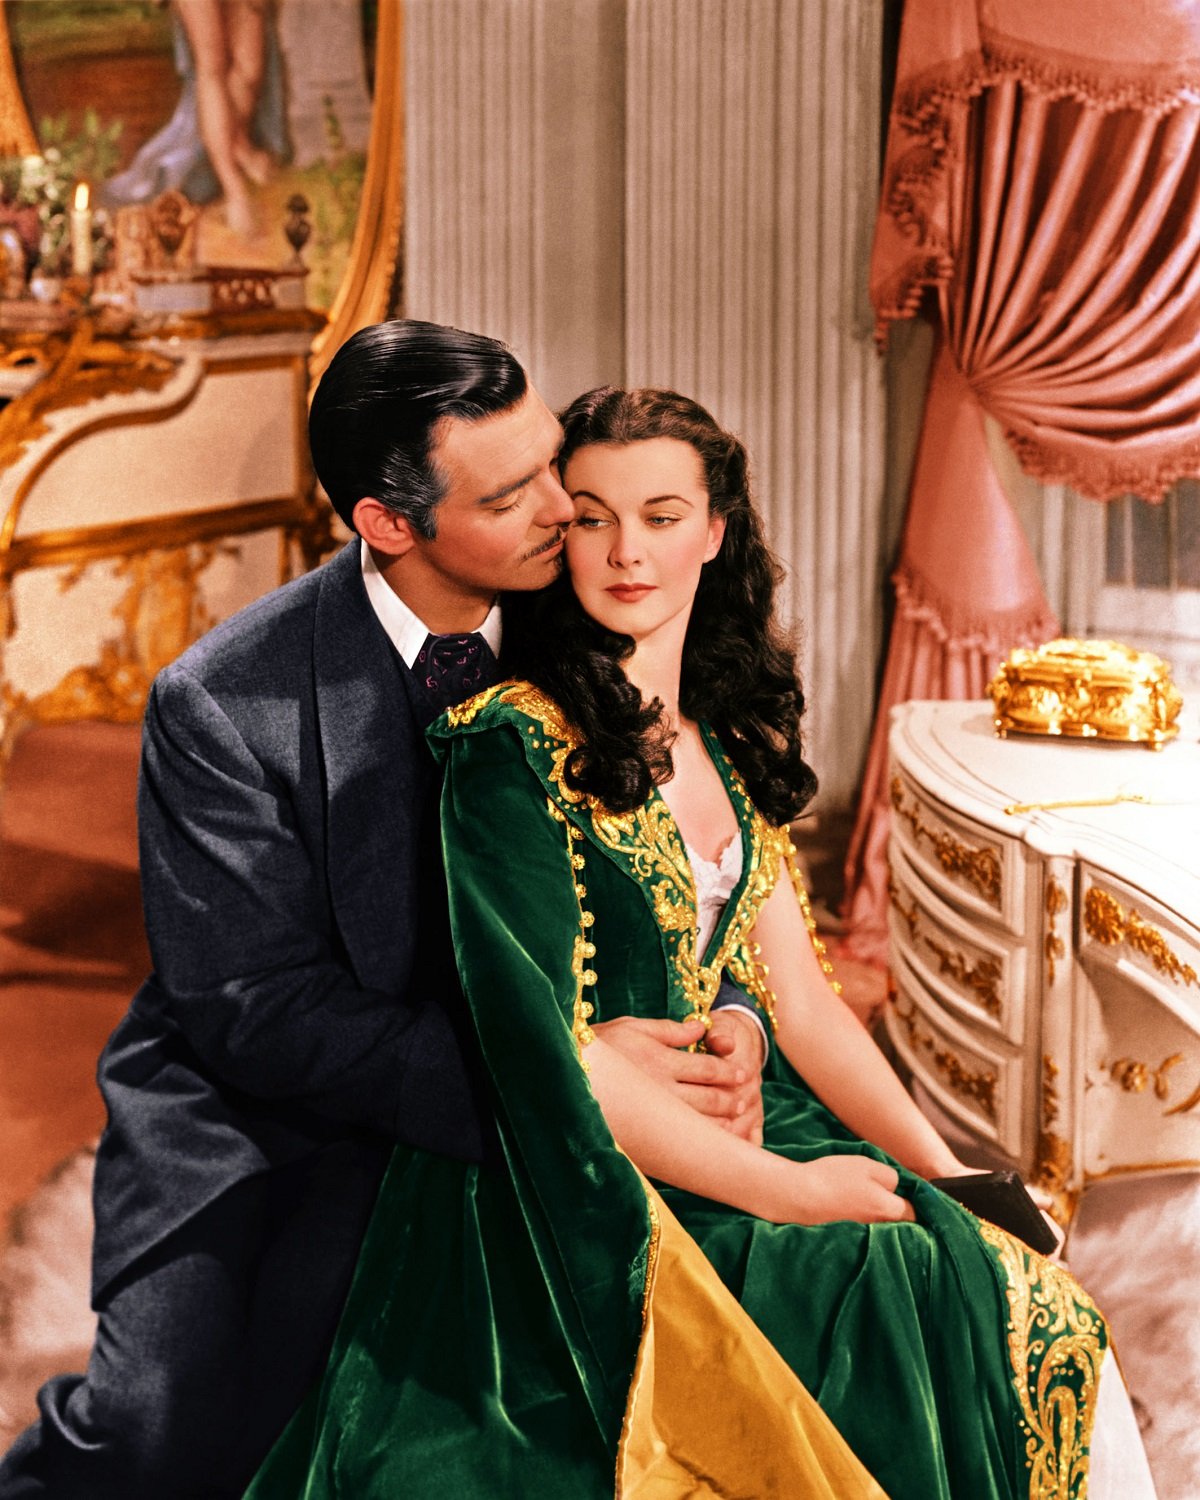 Clark Gable and Vivien Leigh in 1939